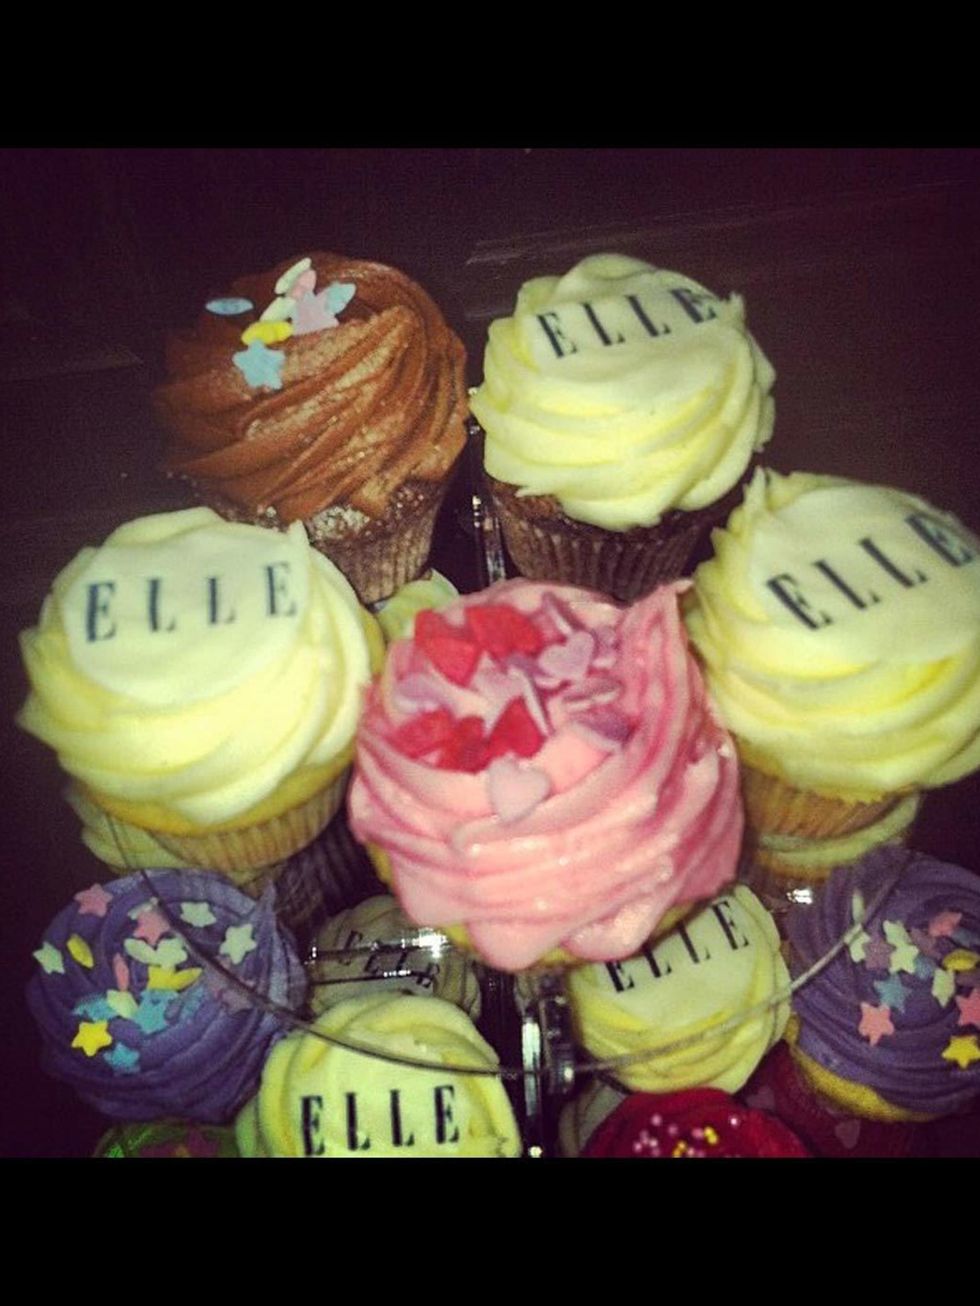 <p>ELLE cupcakes from Lola's</p>